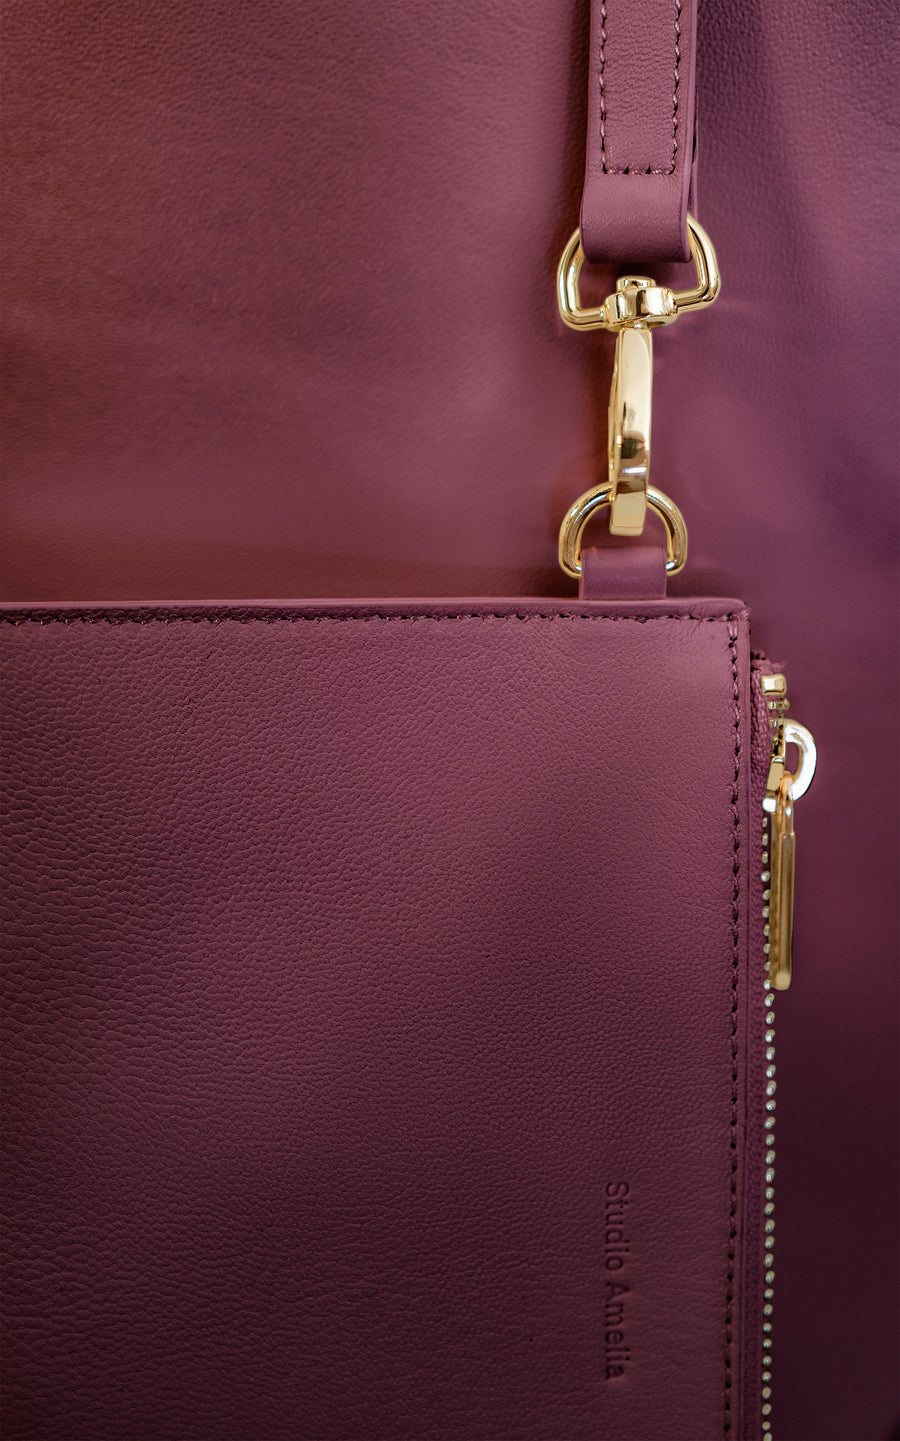 Canter Tote | Burgundy